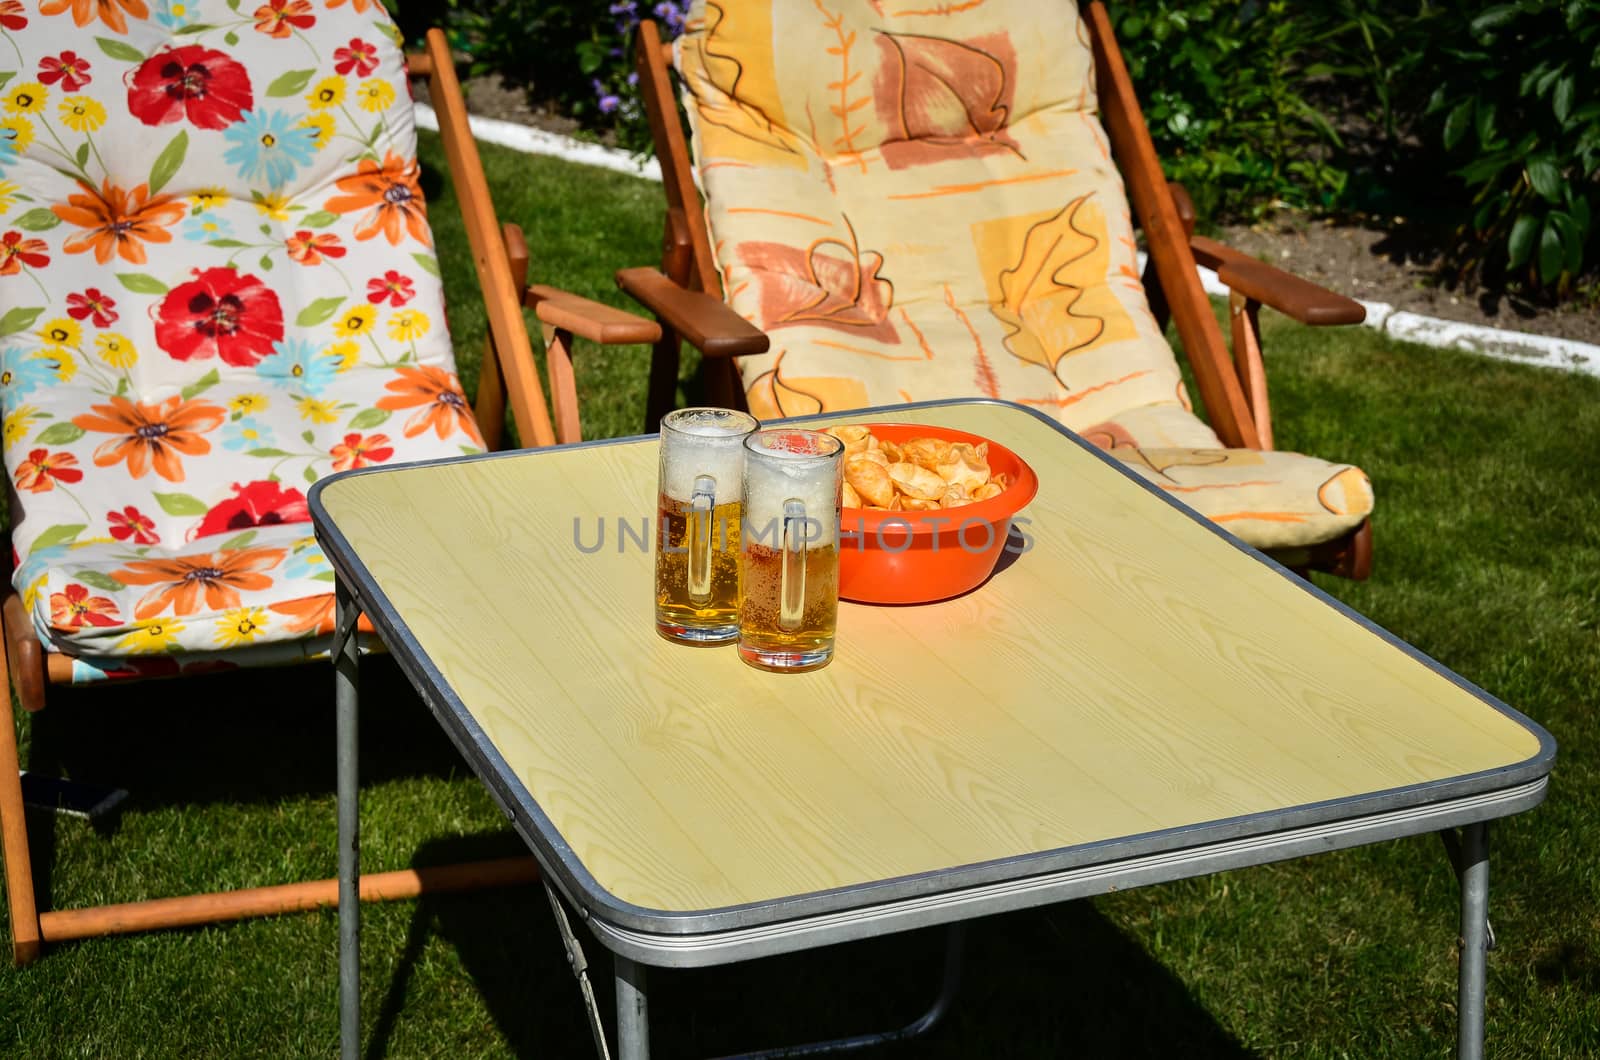 A glass of beer and a bowl of crisps on a table in the garden.